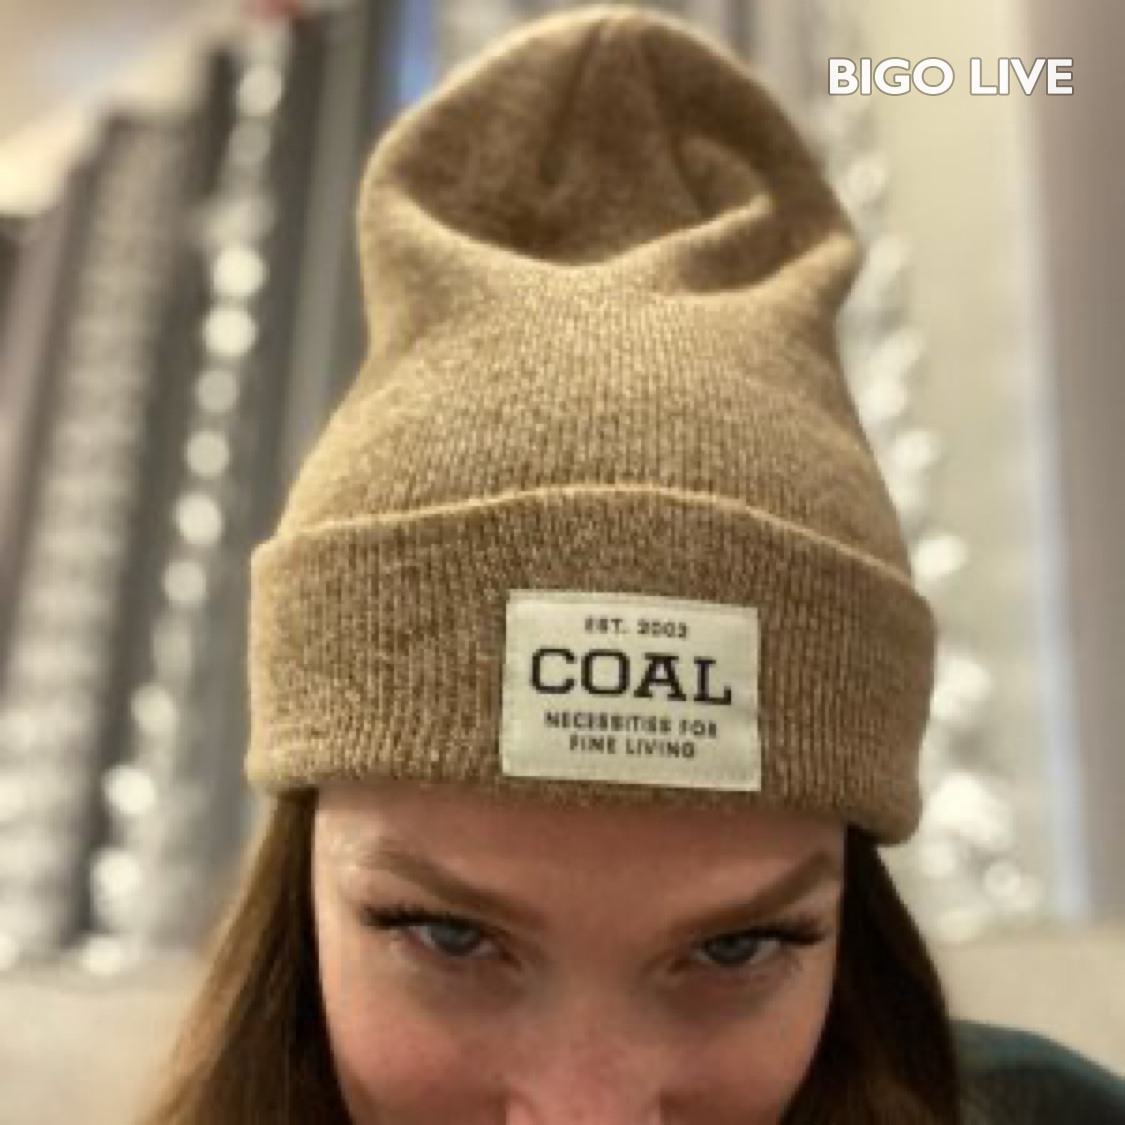 Come and see Costco muffin streaming live on and make new friends! https://t.co/WhXYNnurJt